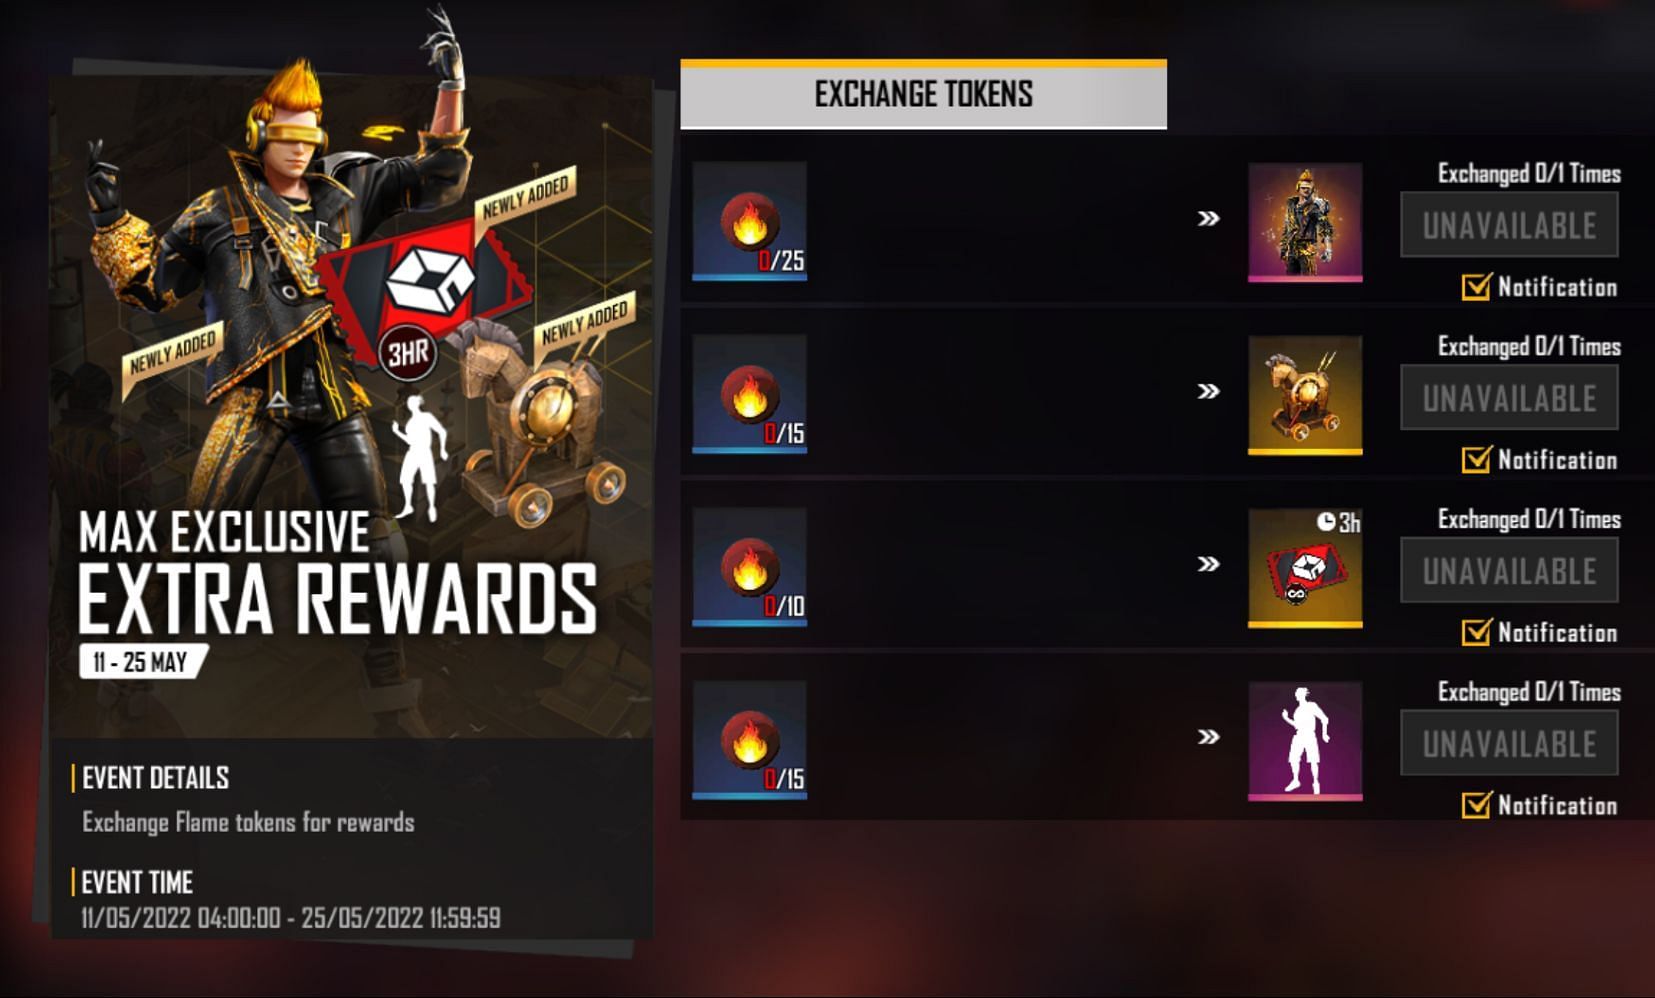 Beside the bundle, users can get a legendary loot box (Image via Garena)